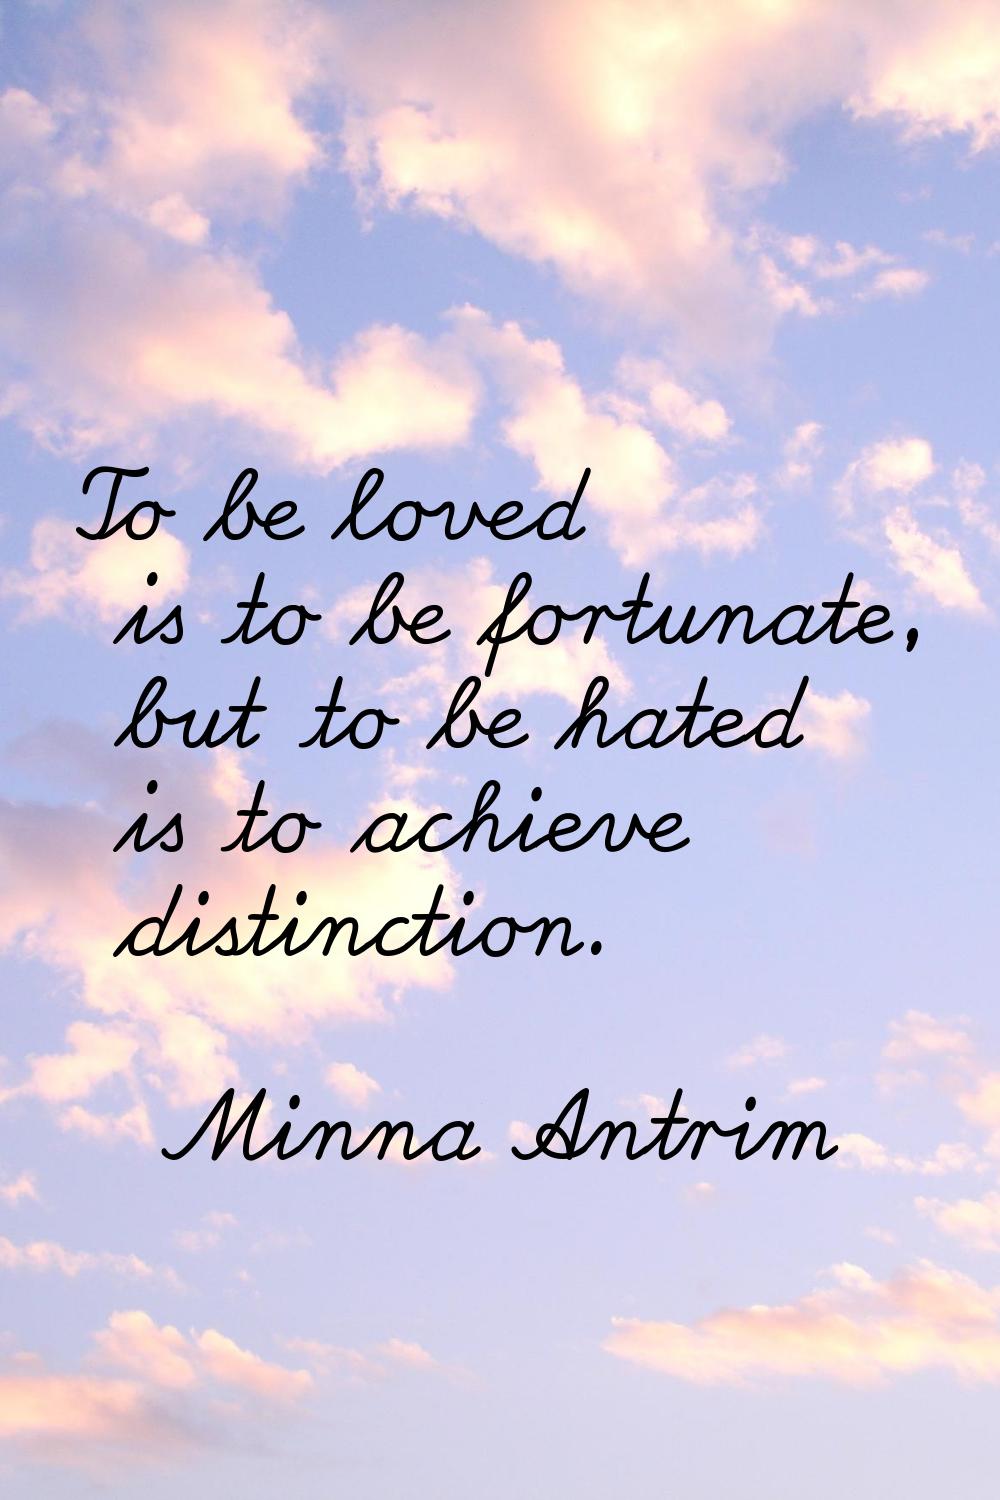 To be loved is to be fortunate, but to be hated is to achieve distinction.